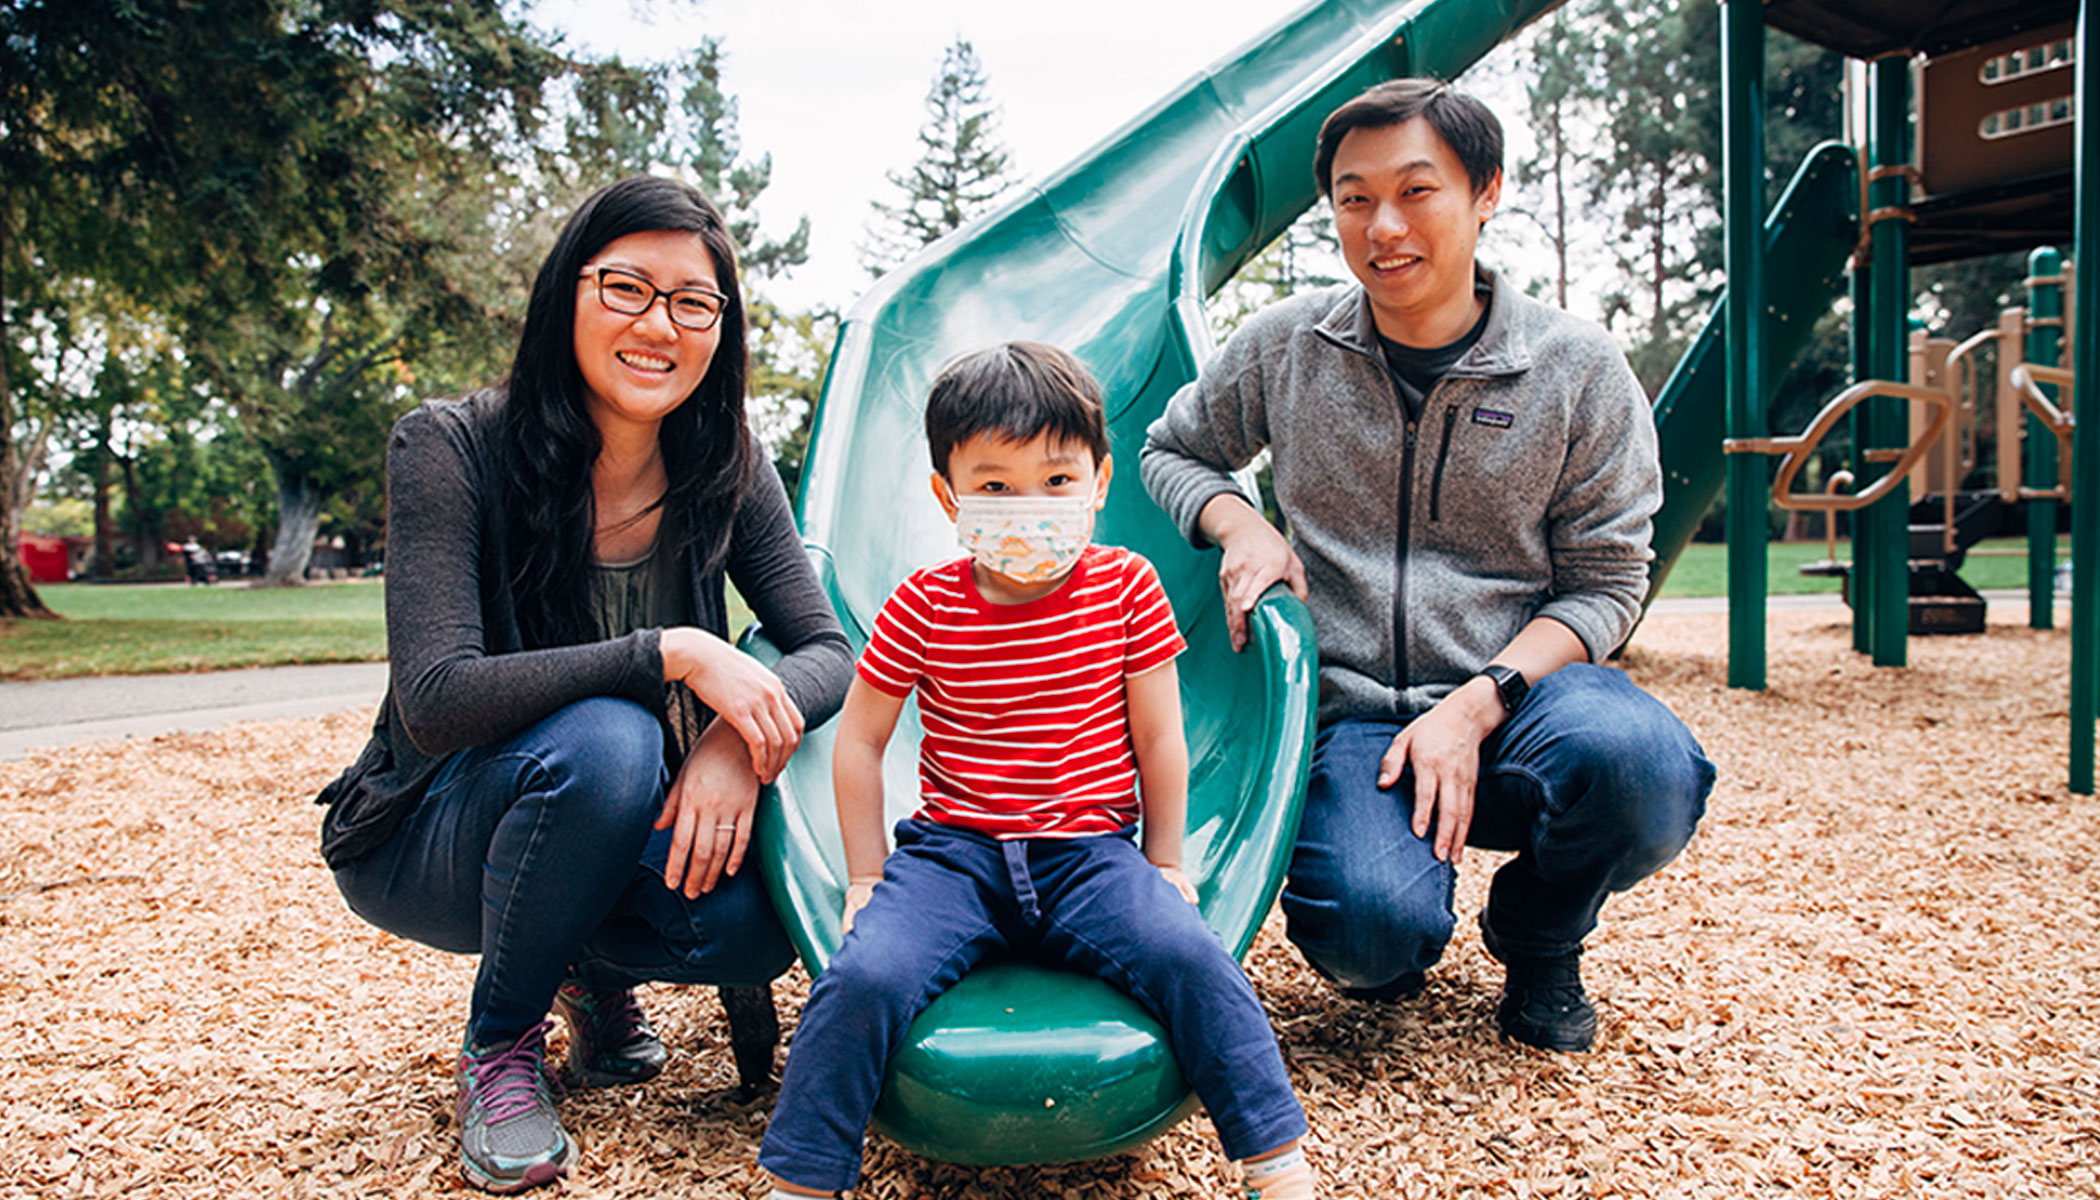 A women, child and man pose for a family picture at the foot of a playground slide.